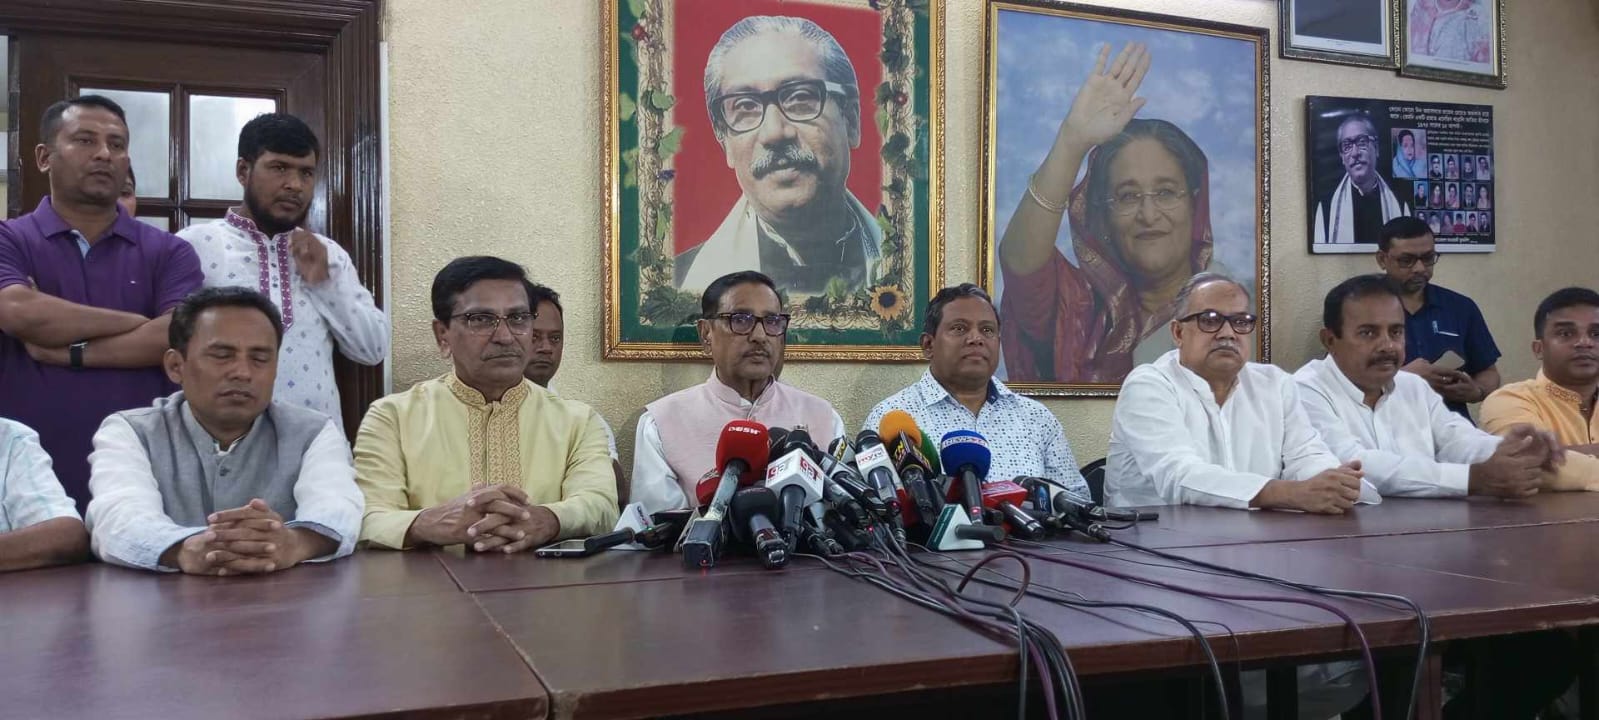 Journalists don’t need to enter central bank, every info on website: Quader